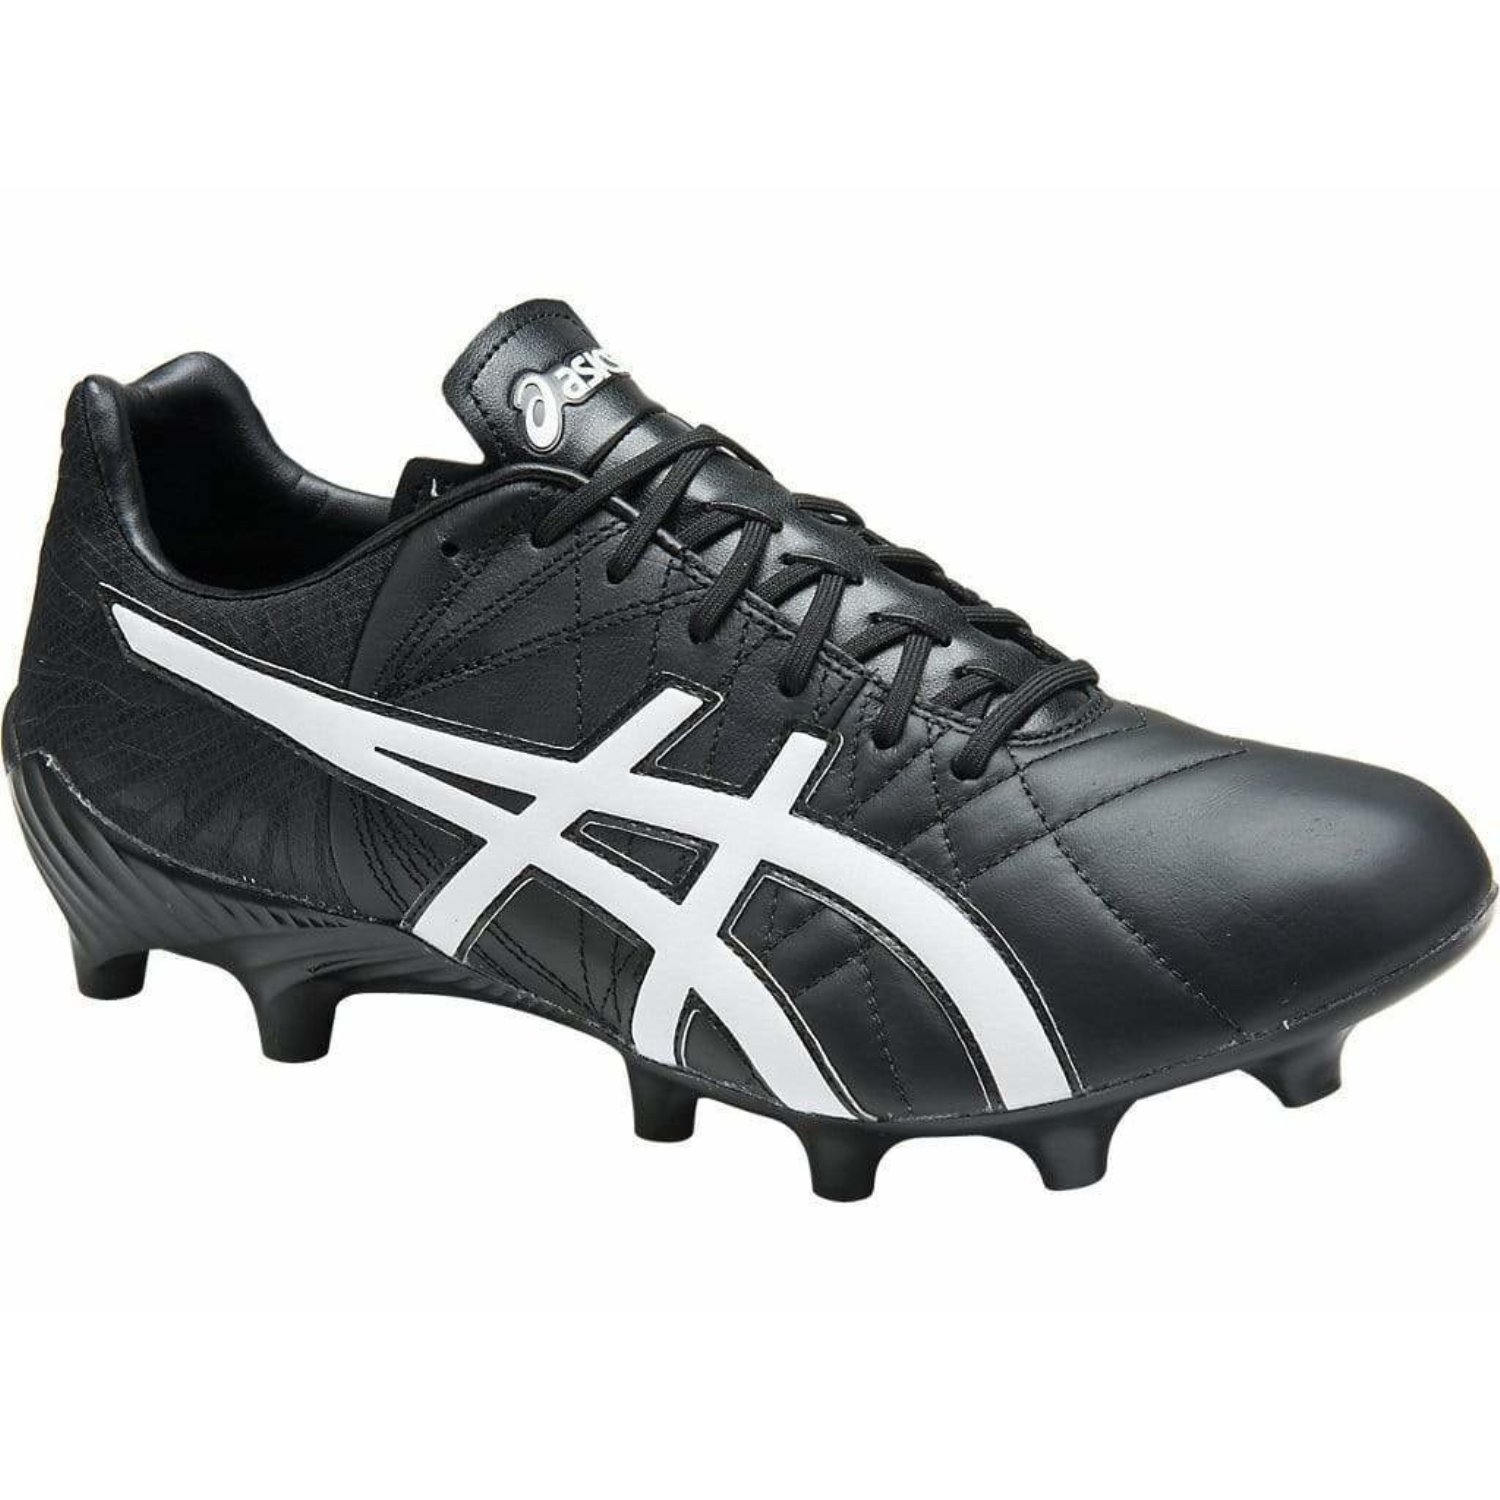 asics lethal football boots